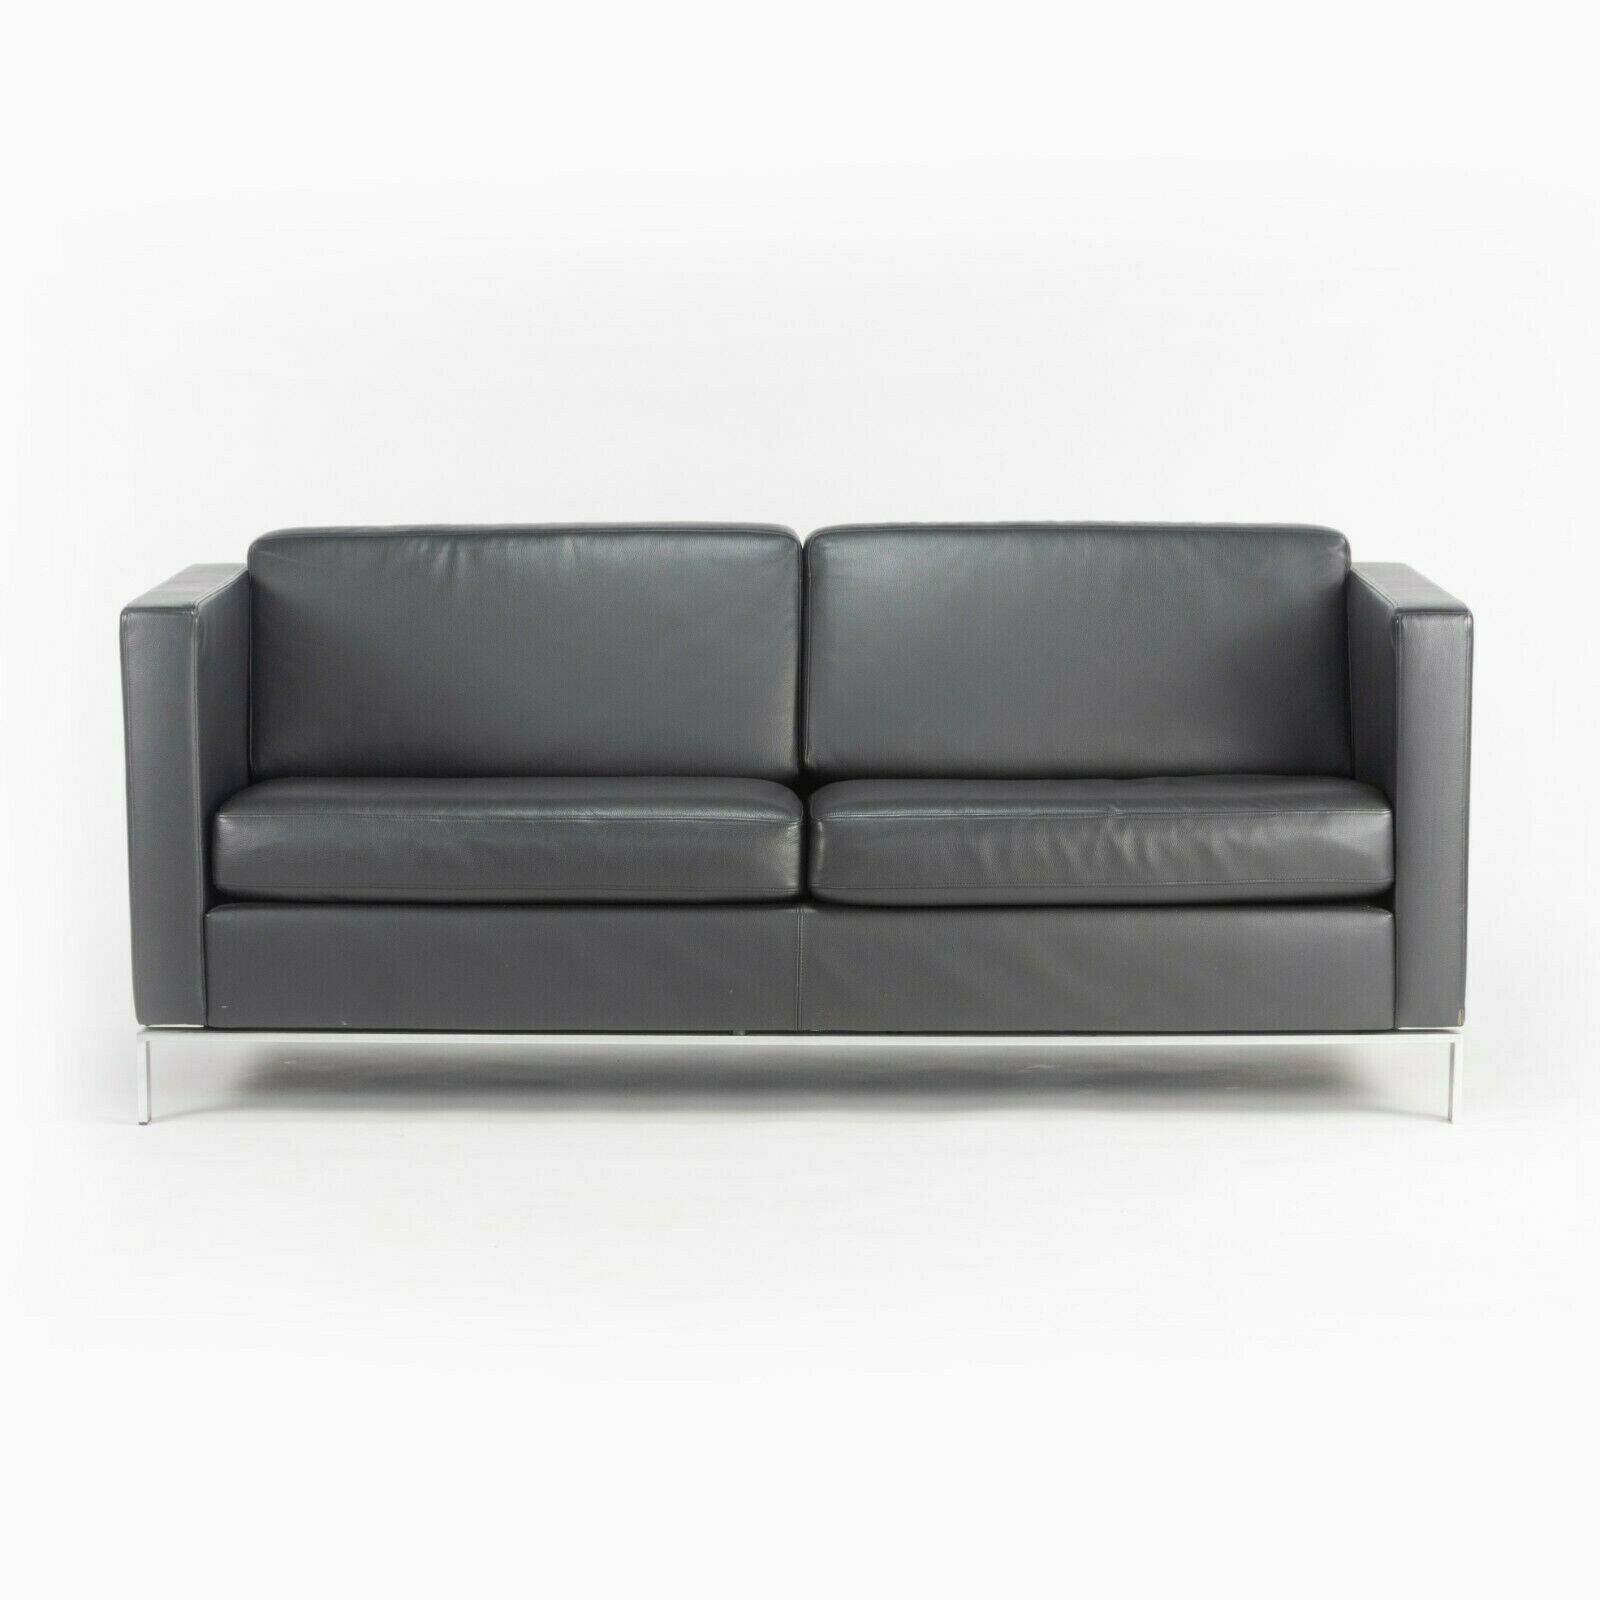 Lord Norman Foster Model 500 Black Leather 2 Seat Settee Sofa for Walter Knoll For Sale 4